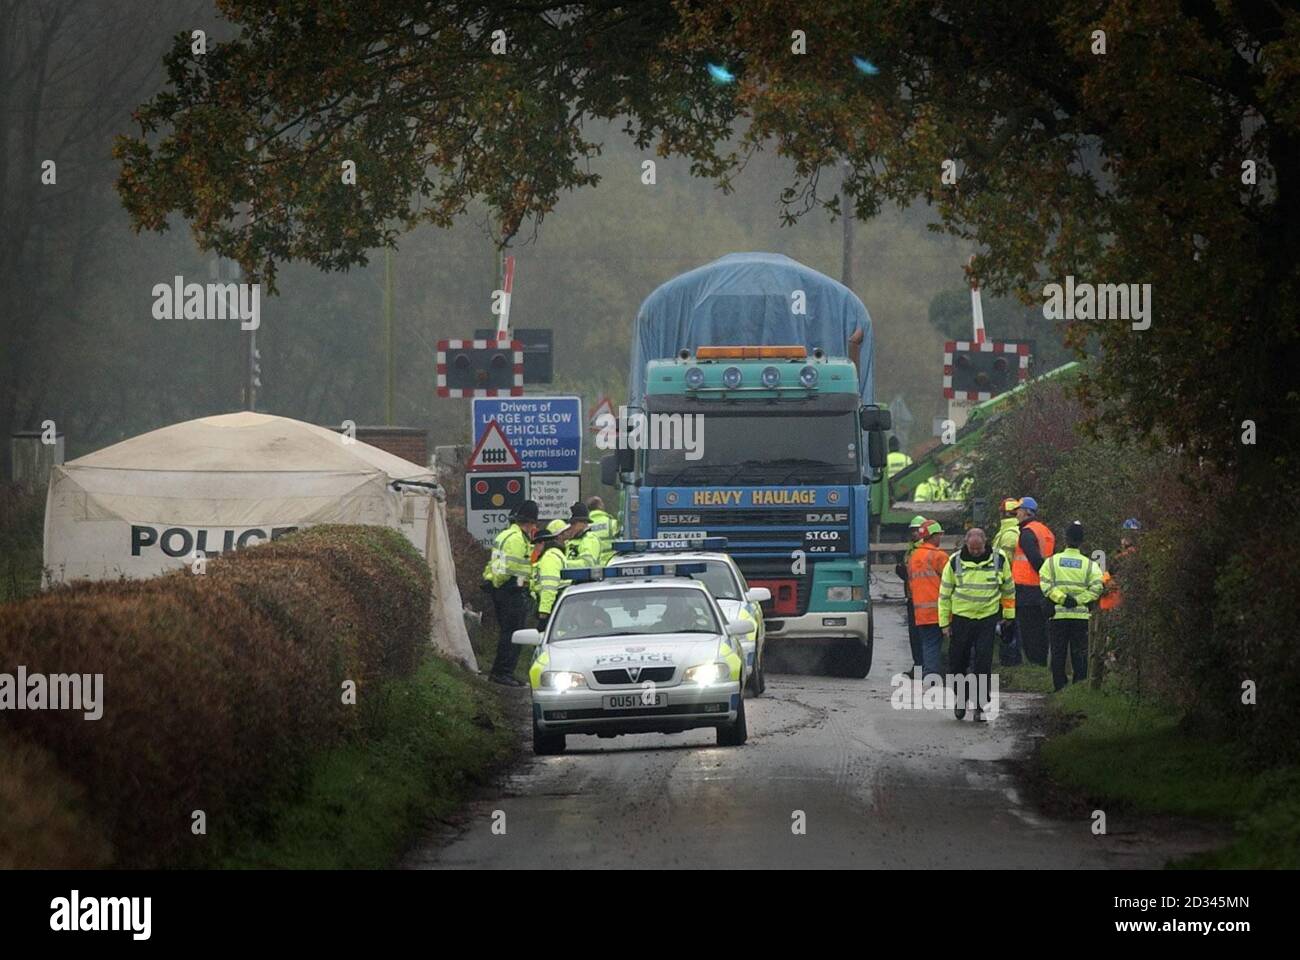 A lorry carries away part of the wreckage from last Saturday's train crash which occurred when a car came to a halt on a level crossing causing the oncoming train to smash into it and derail shortly afterwards at Ufton Nervet in Berkshire. The crash, which has claimed seven lives, happened on Saturday evening after the train had left Reading bound for Plymouth. Stock Photo